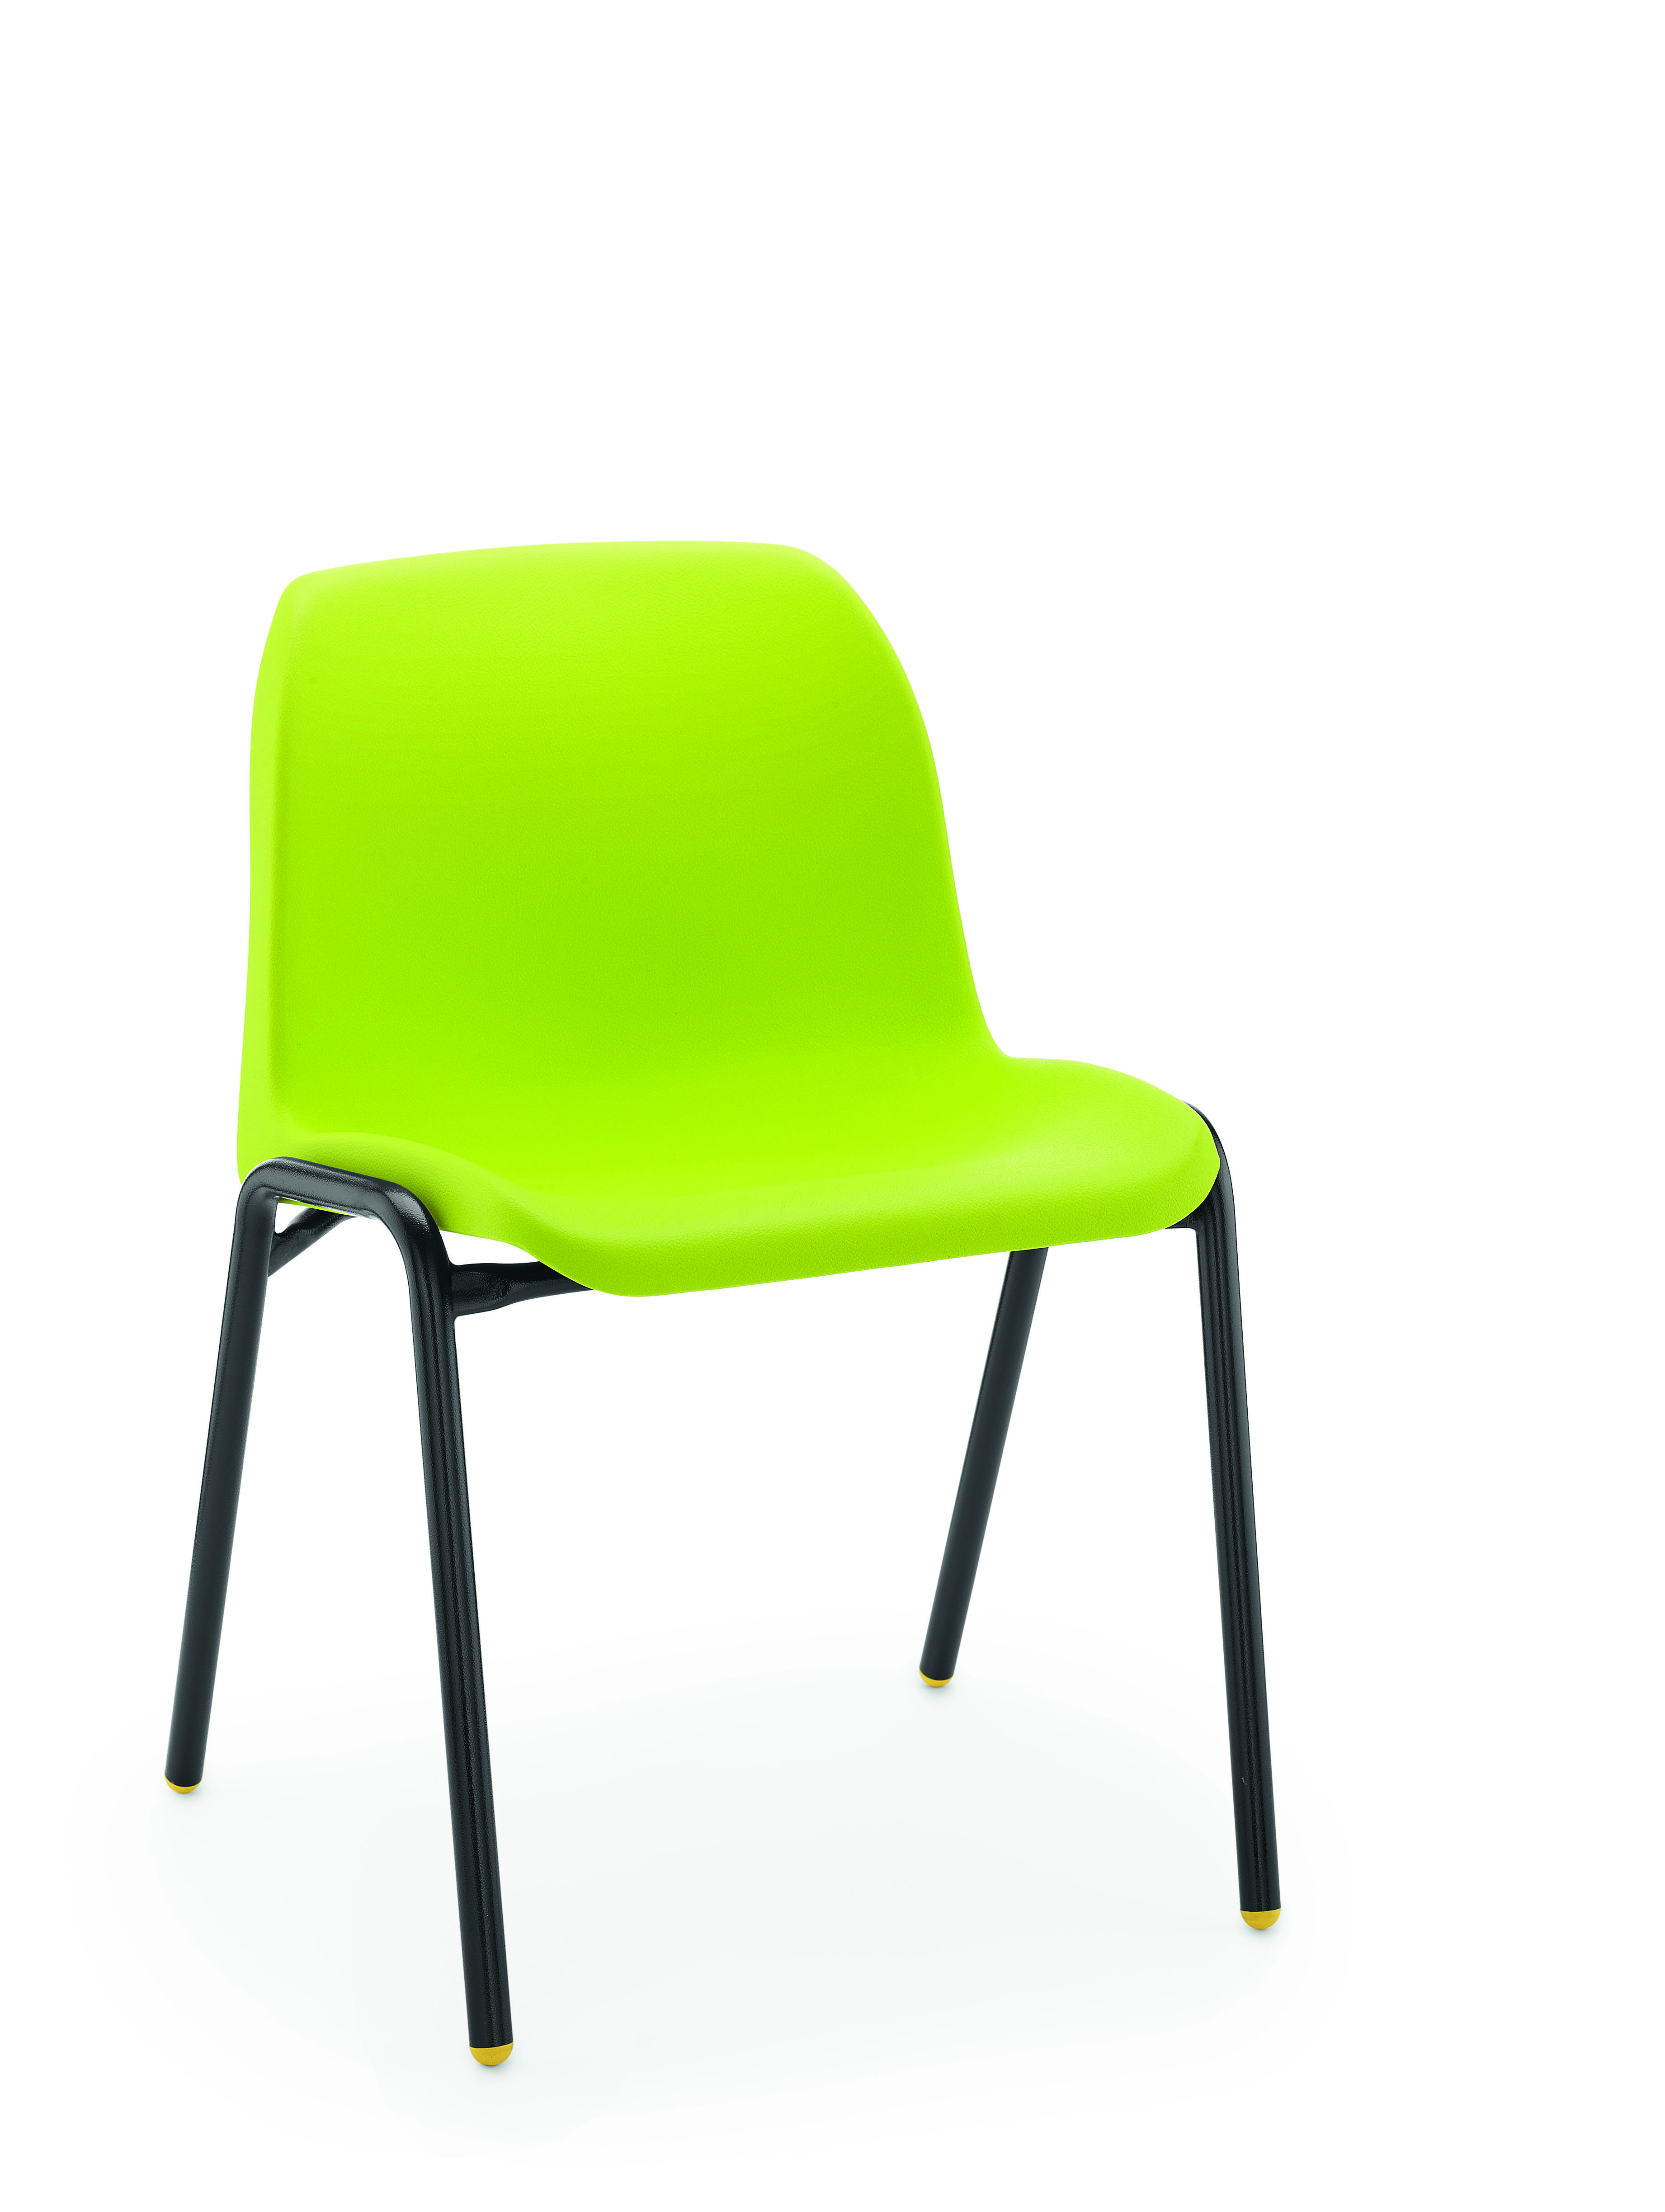 Classmates Chairs - Lime - 6-8 years